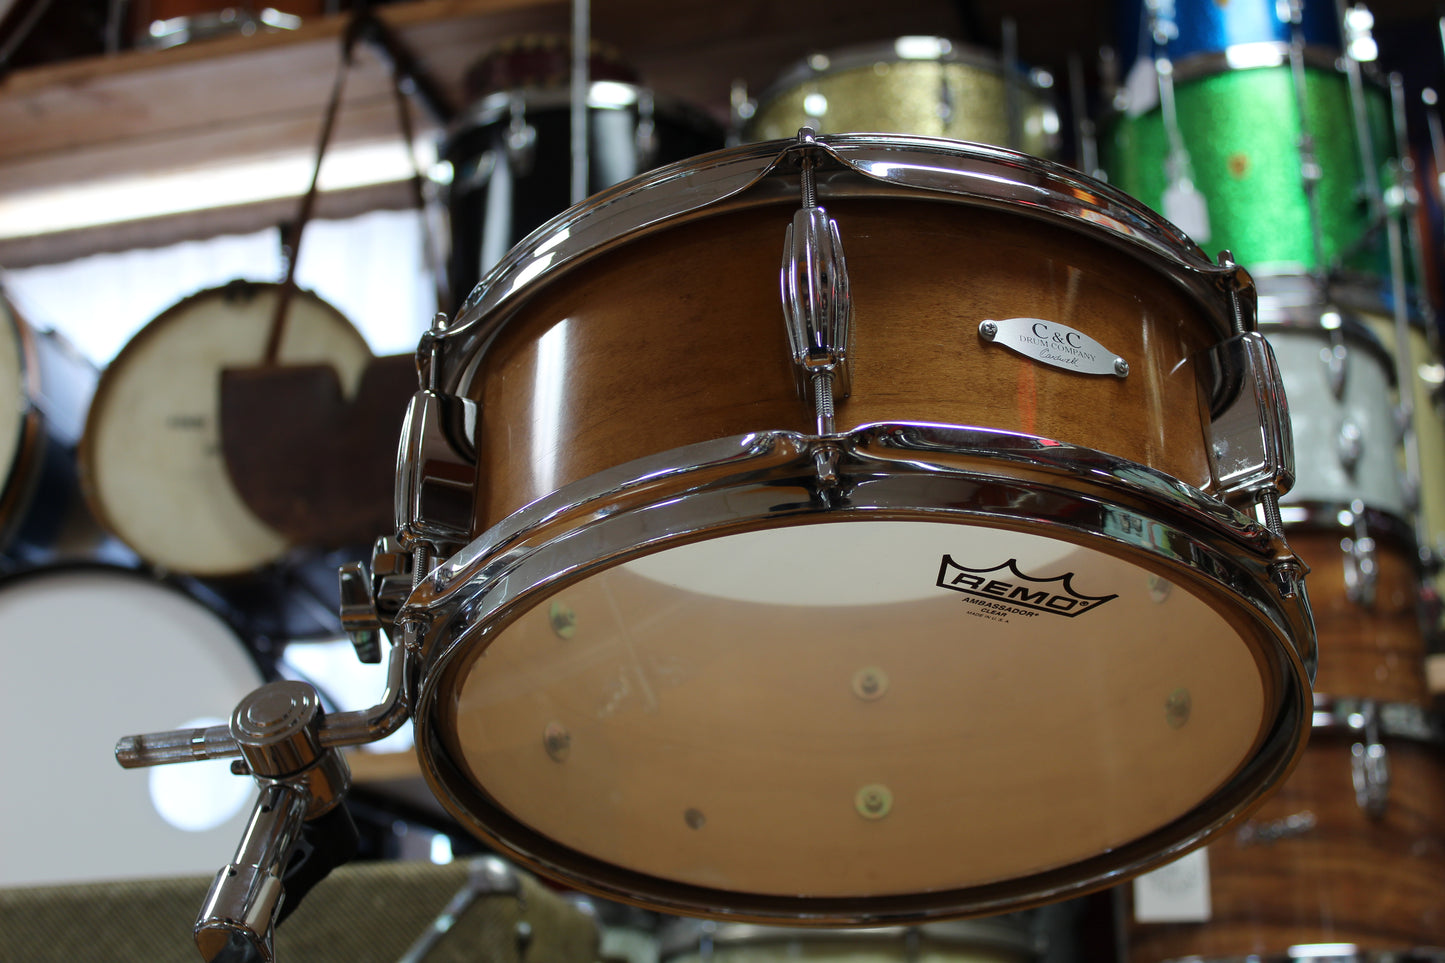 C&C Drum Company Super Flyer 2 in Aged Maple 10x20 10x14 5.5x12